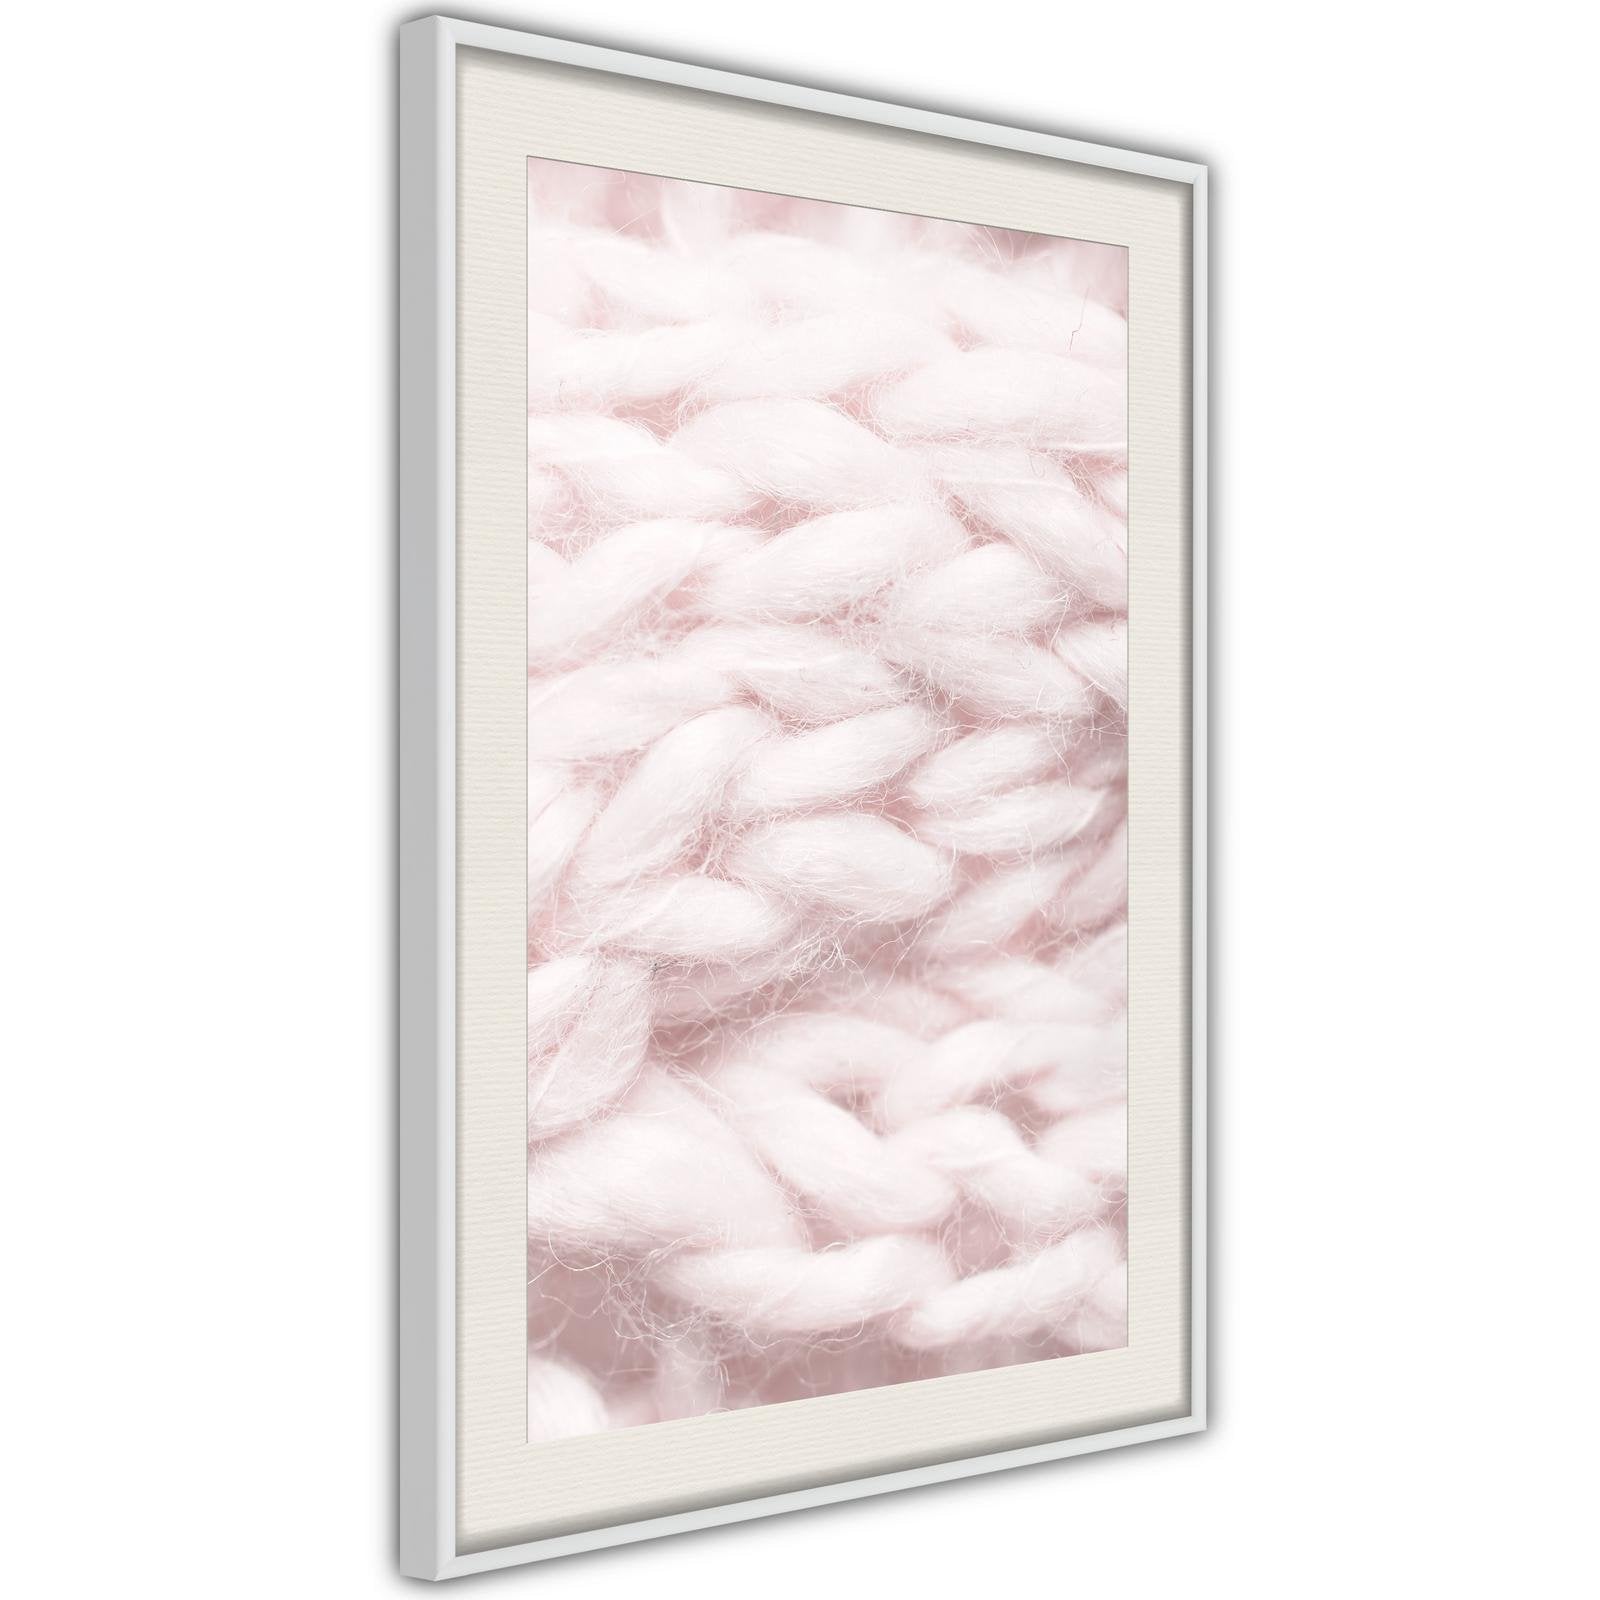 Inramad Poster / Tavla - Pale Pink Knit-Poster Inramad-Artgeist-peaceofhome.se